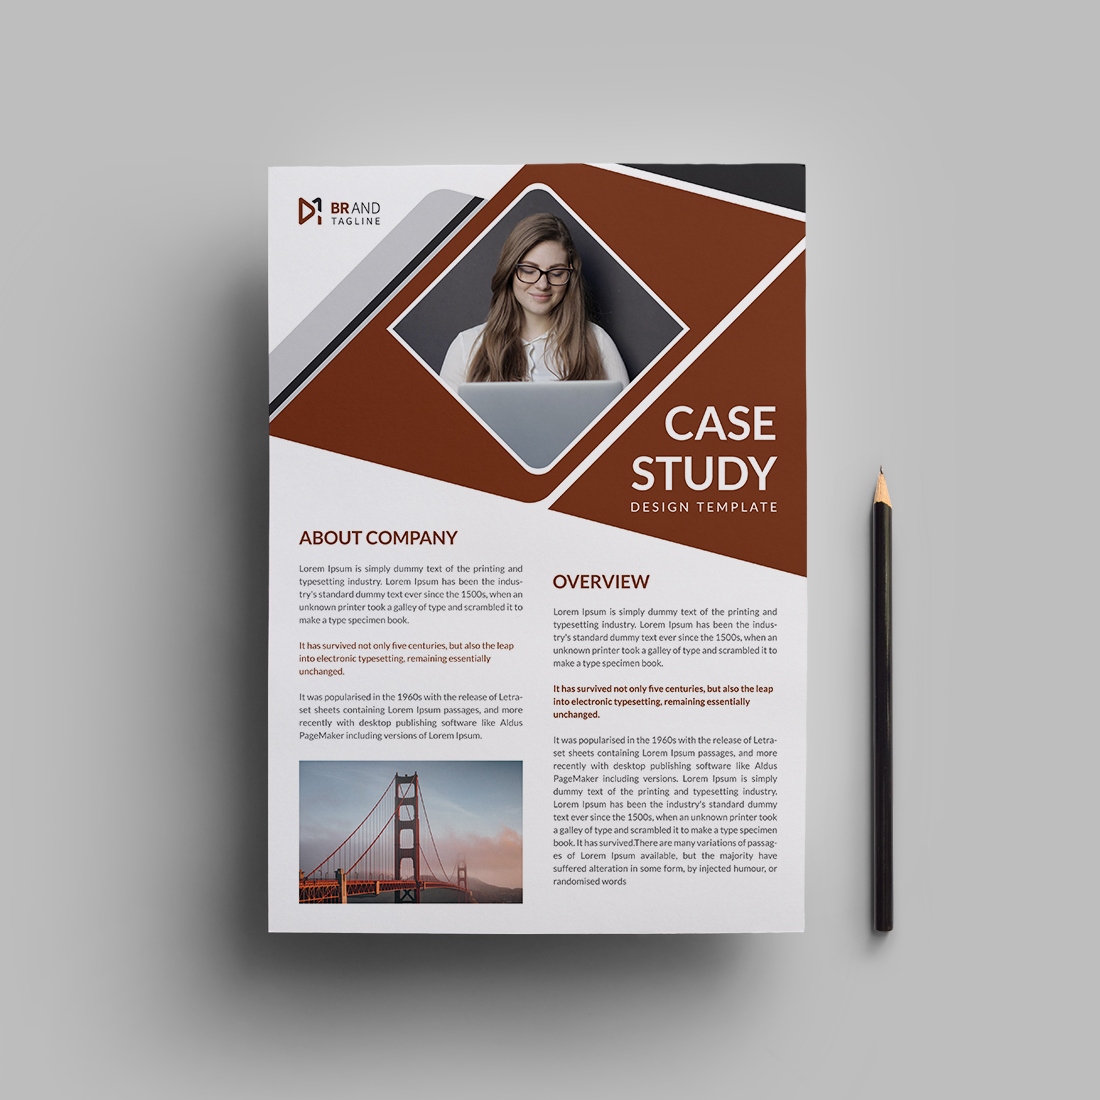 Case study flyer template design for corporate project preview image.